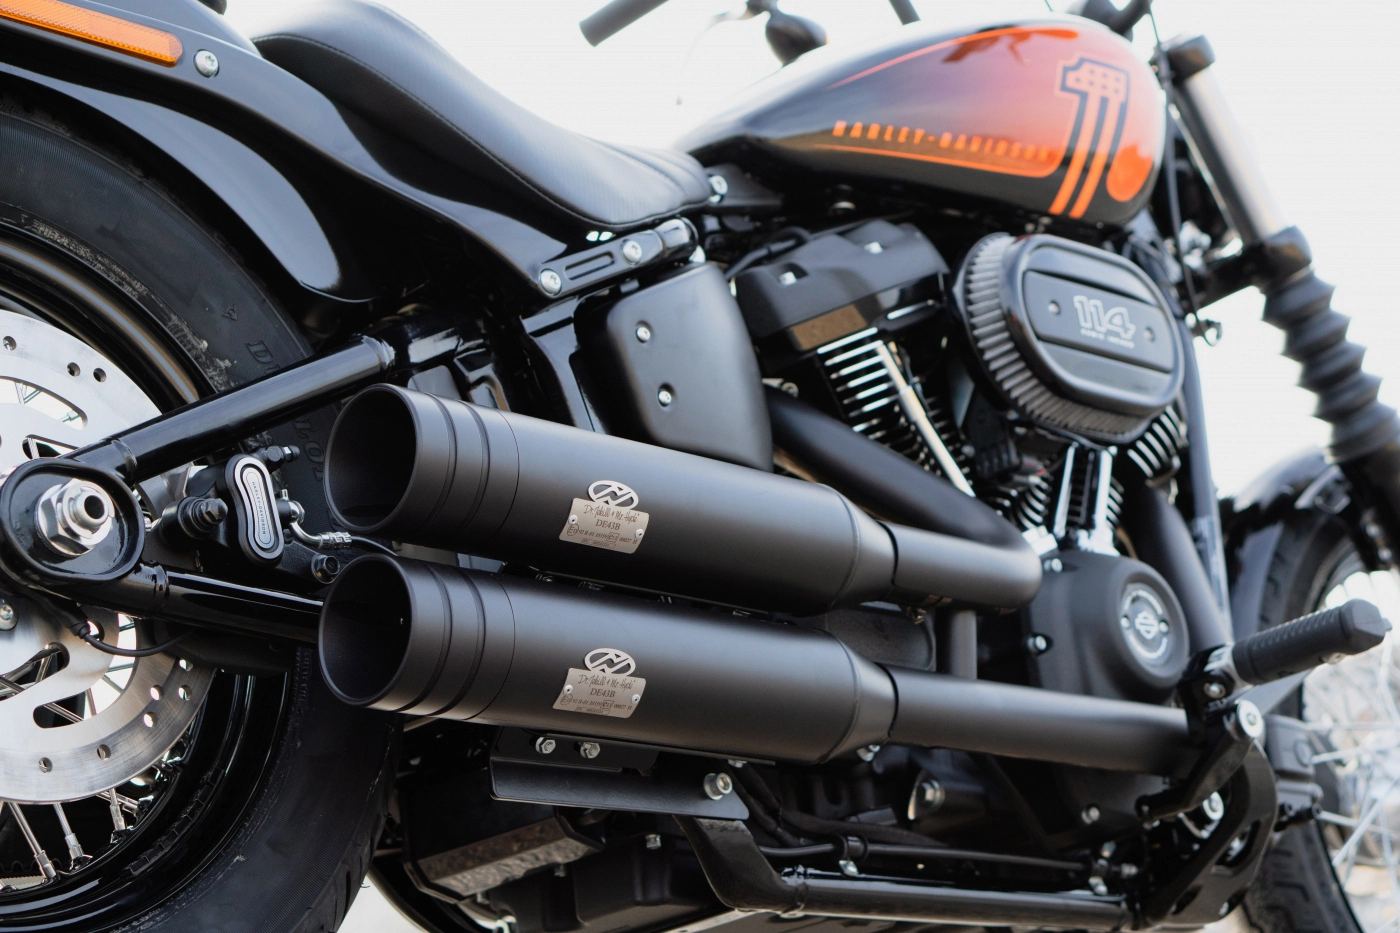 Dr. Jekill & Mr. Hyde ®The Exhaust for H-D Cruiser Models